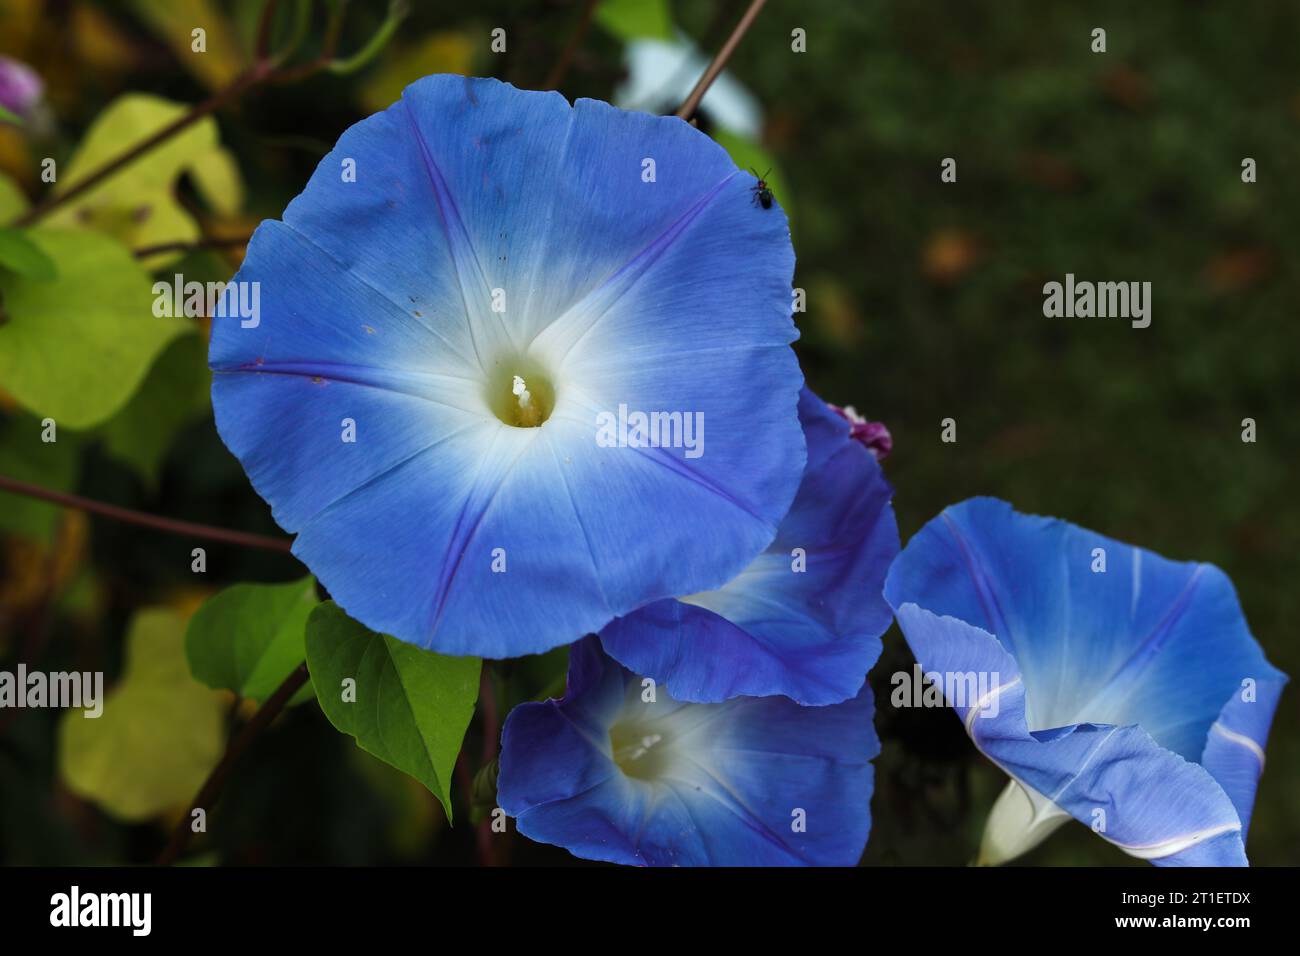 Ipomoea tricolor, the Mexican morning glory or just morning glory in the autumn garden Stock Photo